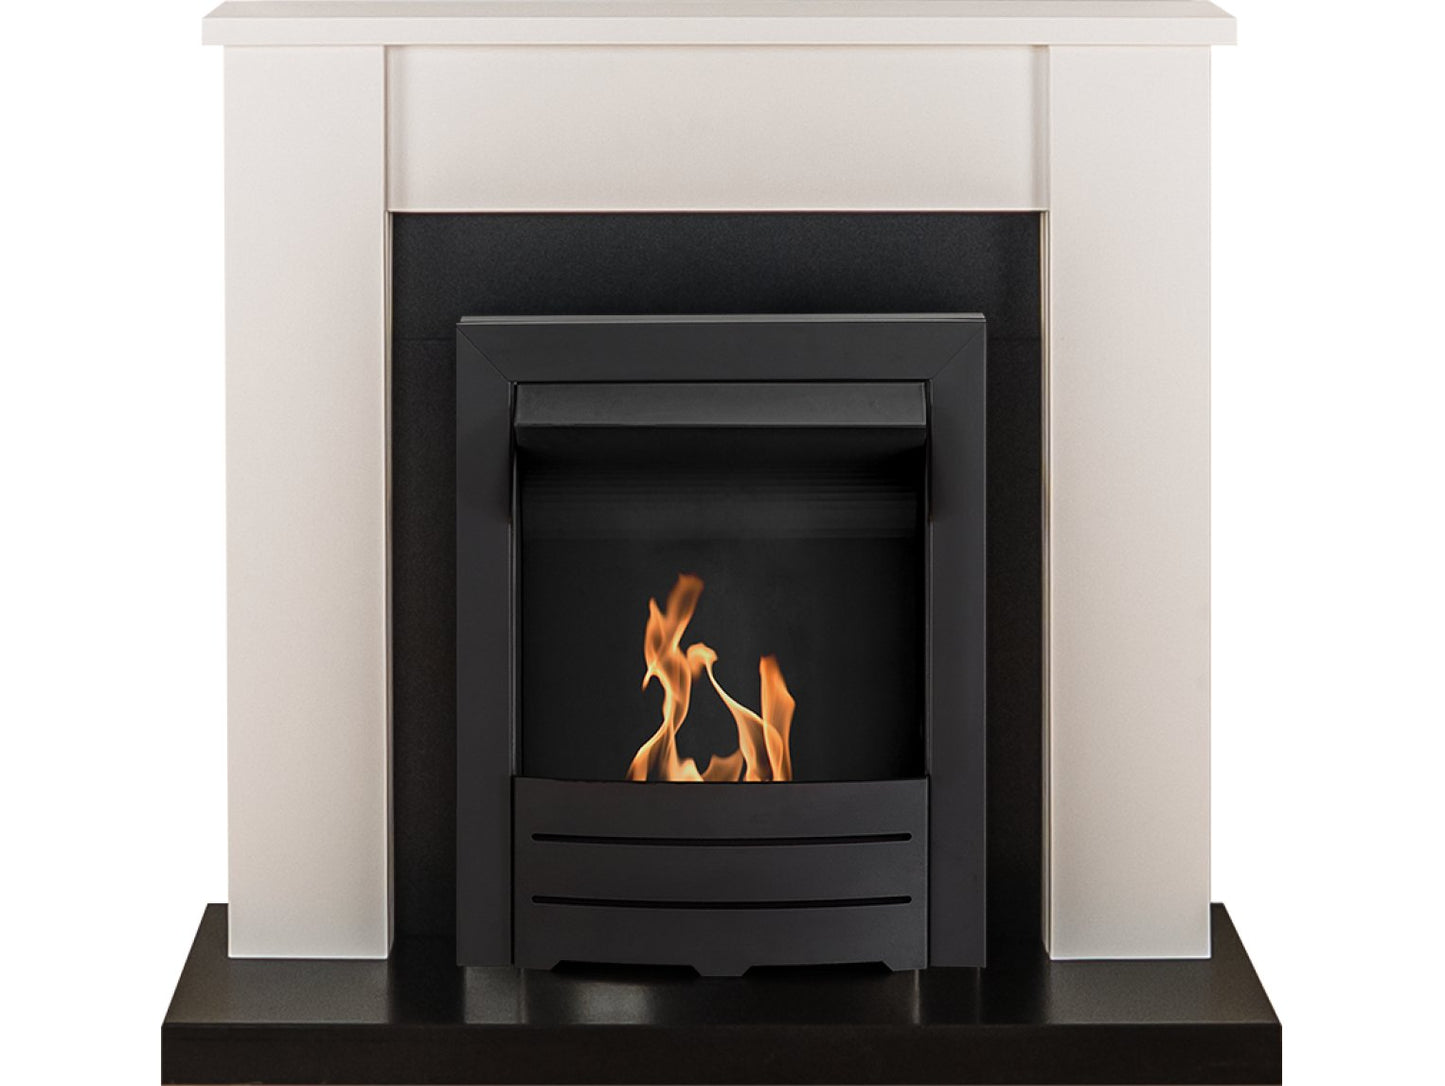 Adam Solus Fireplace Suite in Black & White with Colorado Bio Ethanol Fire in Black, 39 Inch